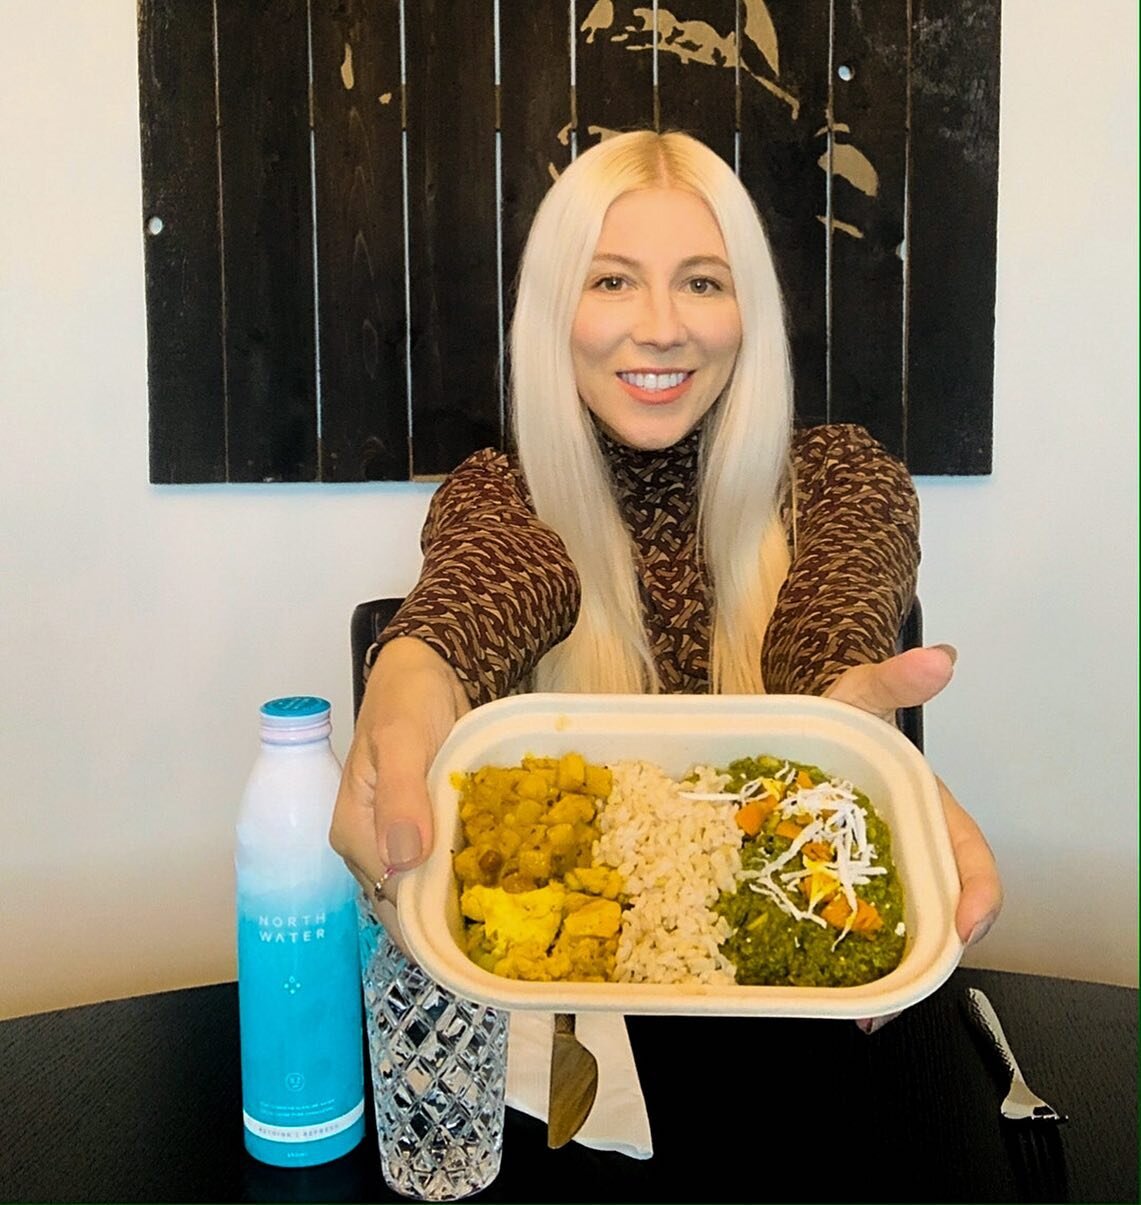 MEET KATRINA 👋🏻 Katrina is a part of our awesome Turmeric Team and loves trying new products that are plant-based, delicious, and energizing for your body! 

&ldquo;I love the ease and convenience of ordering these plant-based bowls. Every bowl I h